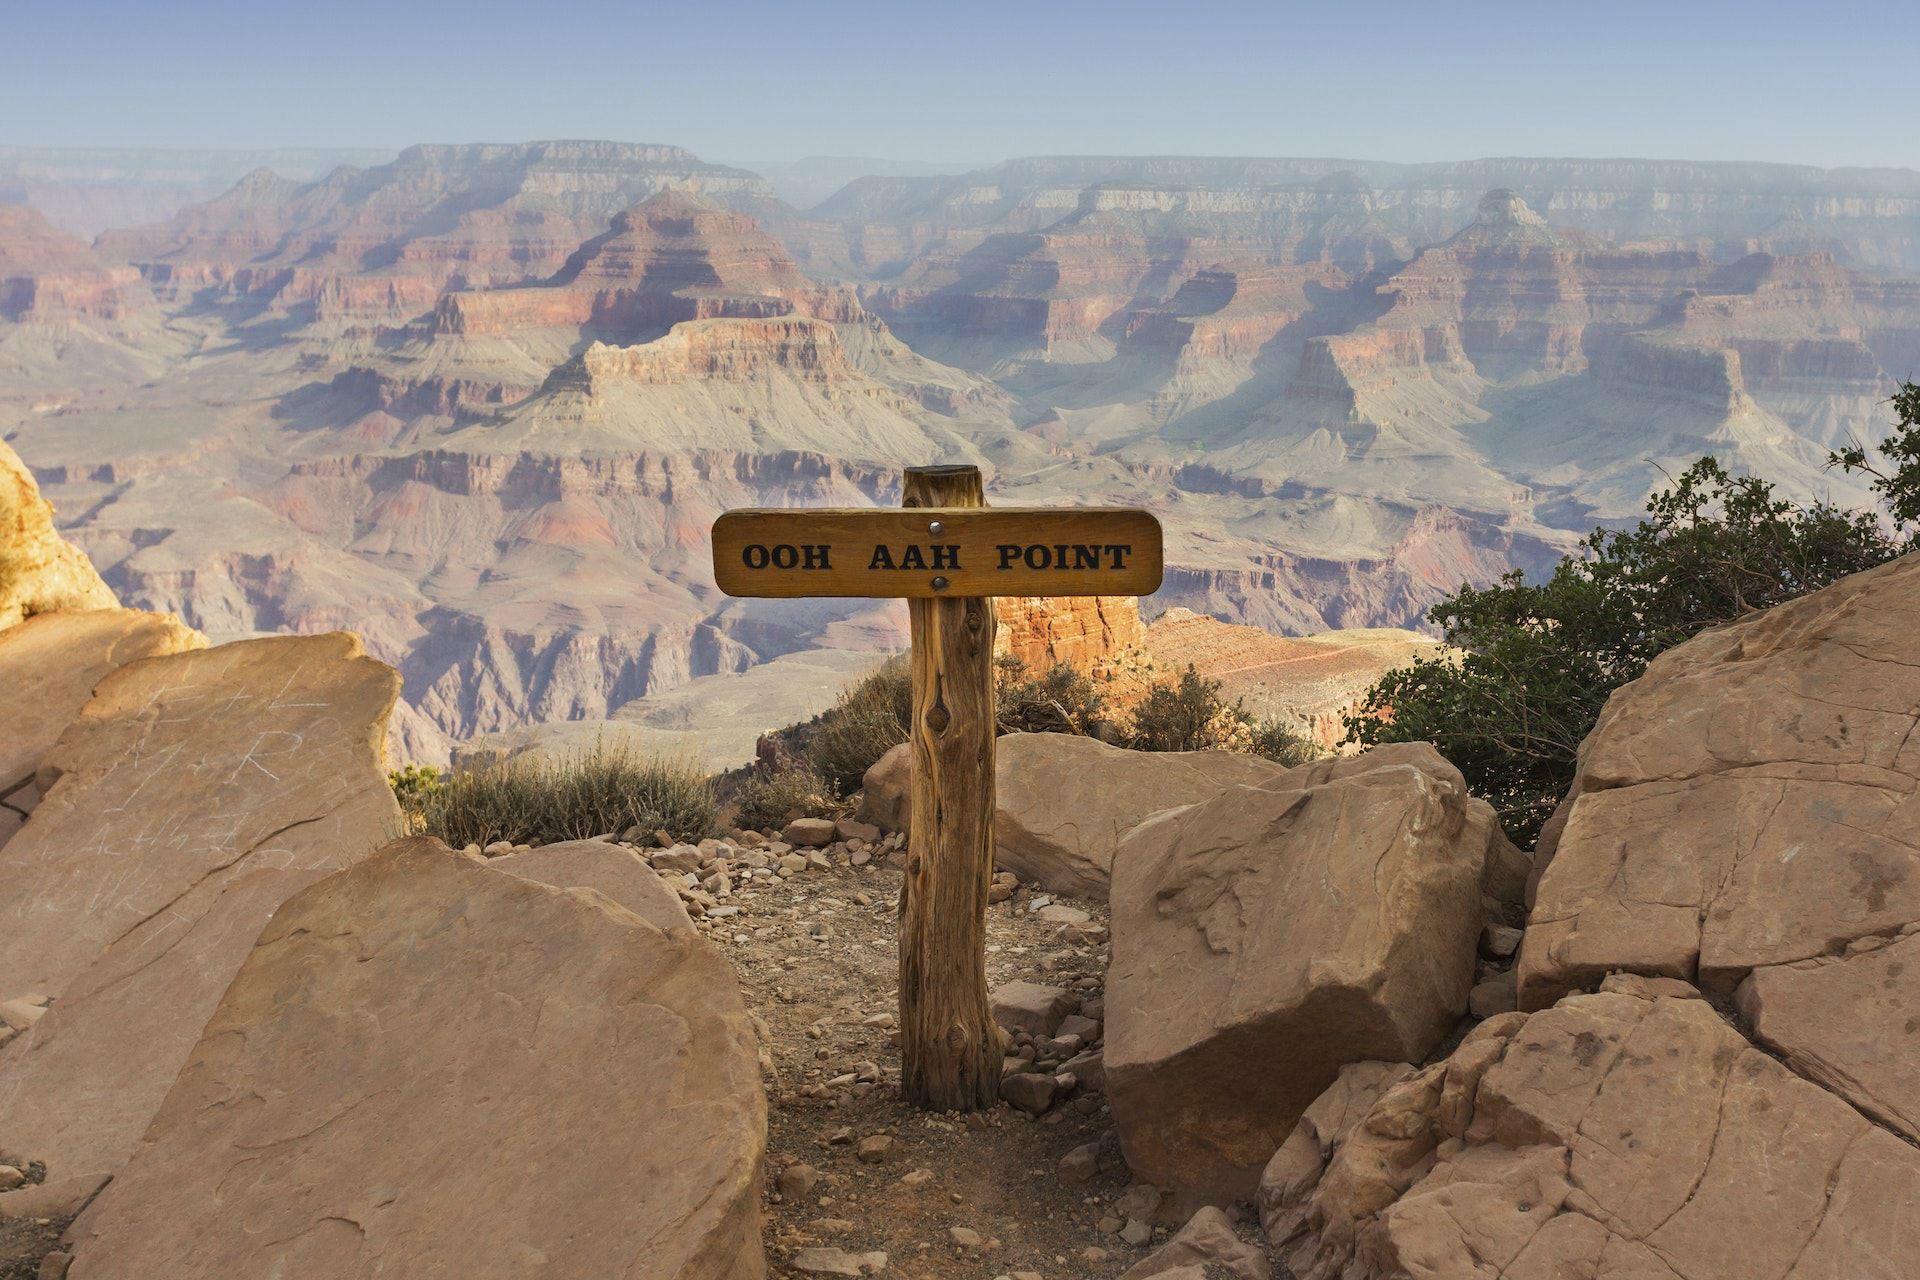 The wooden Ooh Aah Point sign in the centre of the picture, which overlooks the vast Grand Canyon